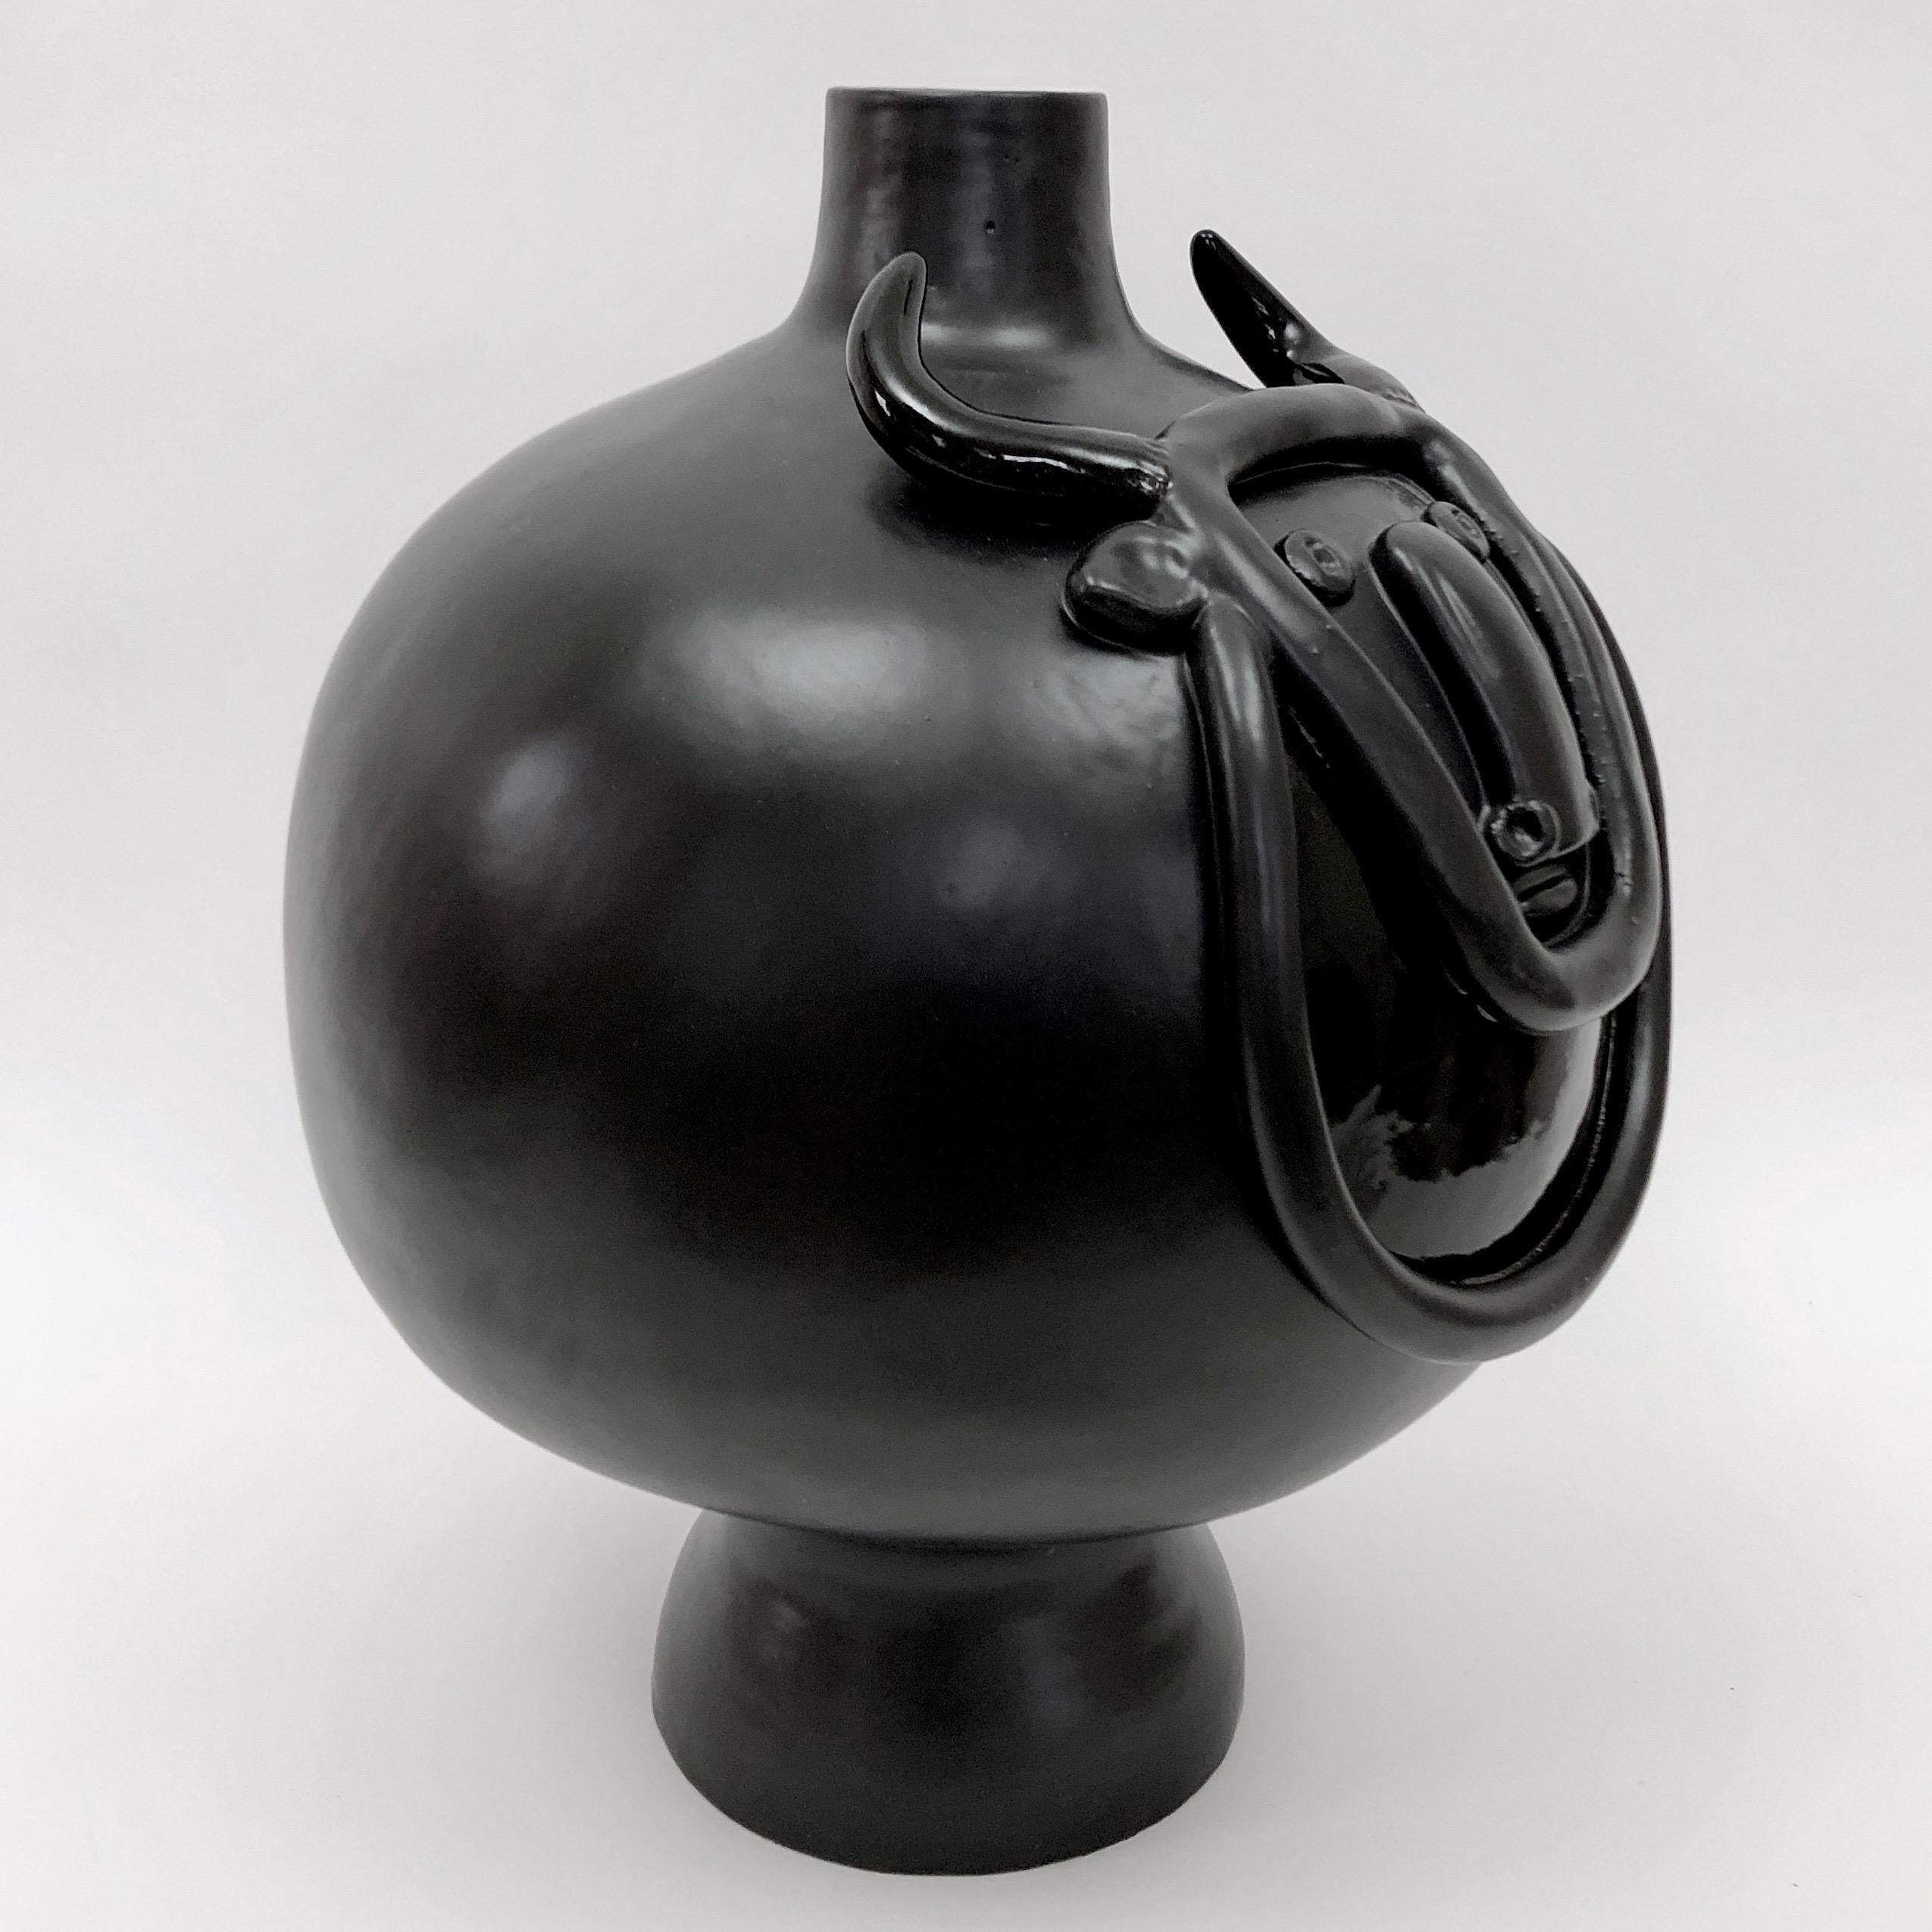 Important sculpture, forming a table lamp base.
Ceramic glazed in matte and glossy black, decorated with a stylized bull face and details sculpted front and back. 

One of a kind handmade piece, signed and numerated by the French artists and